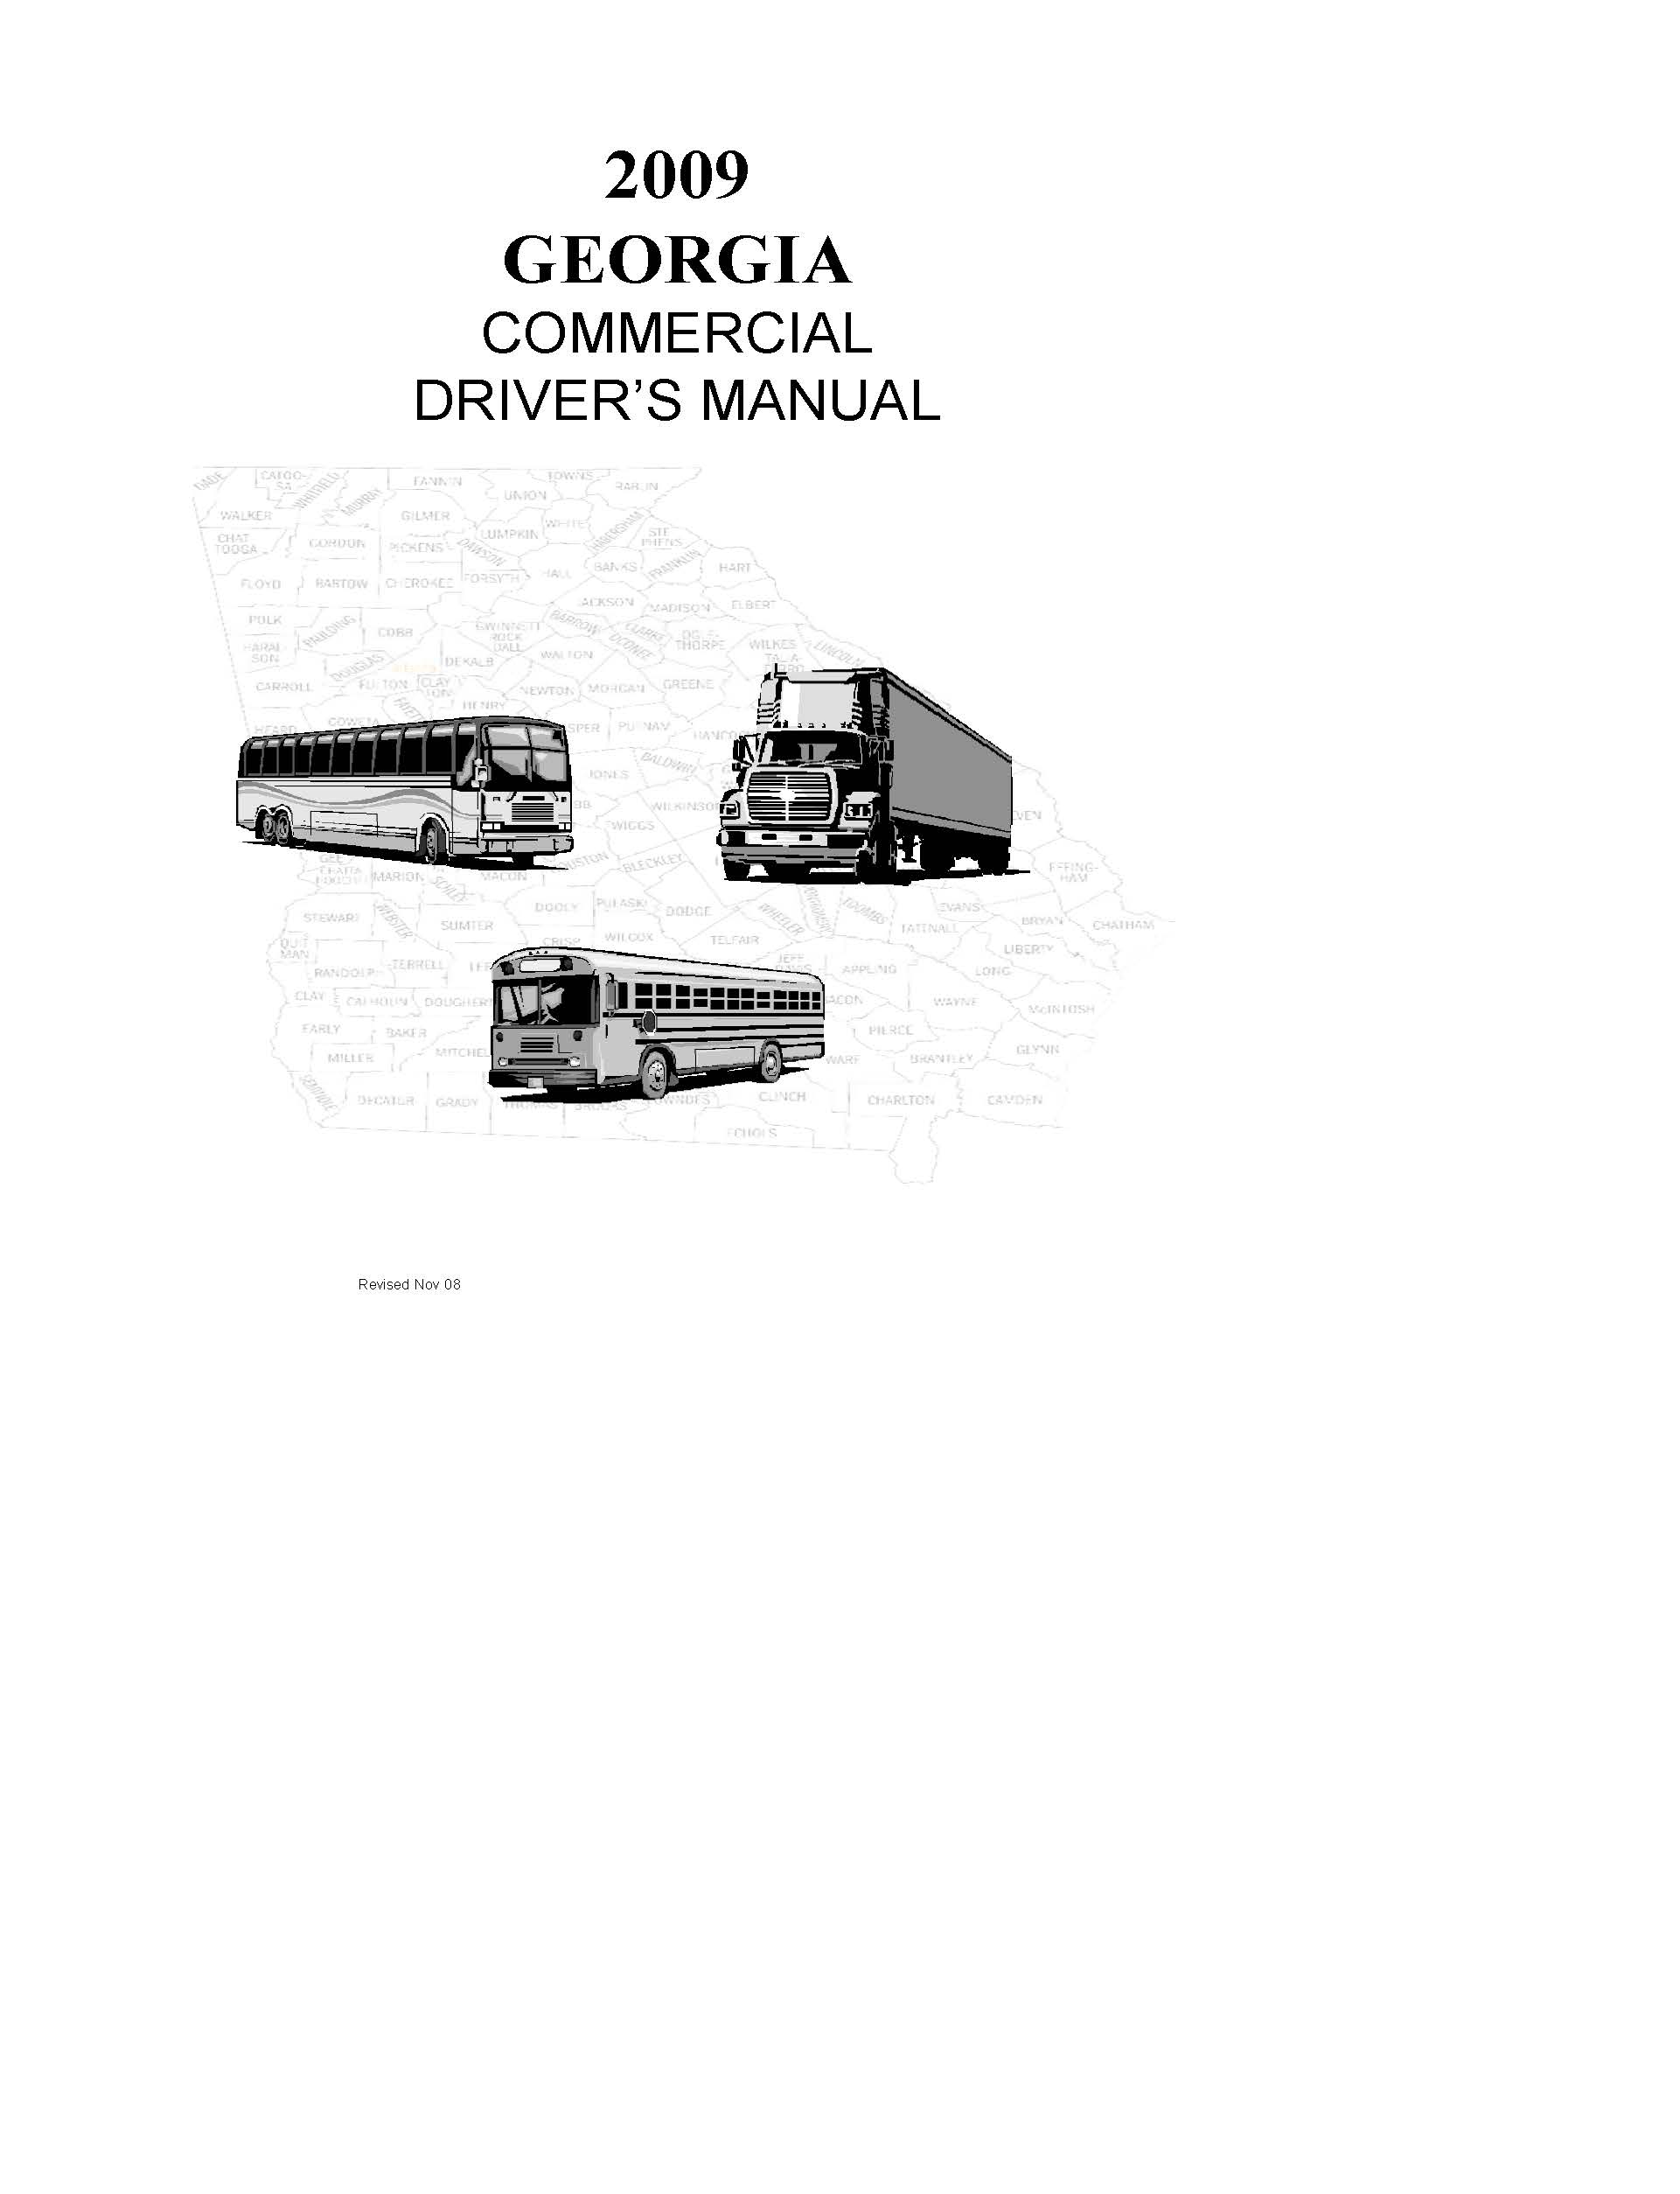 Georgia Commercial Drivers License Manual 2009